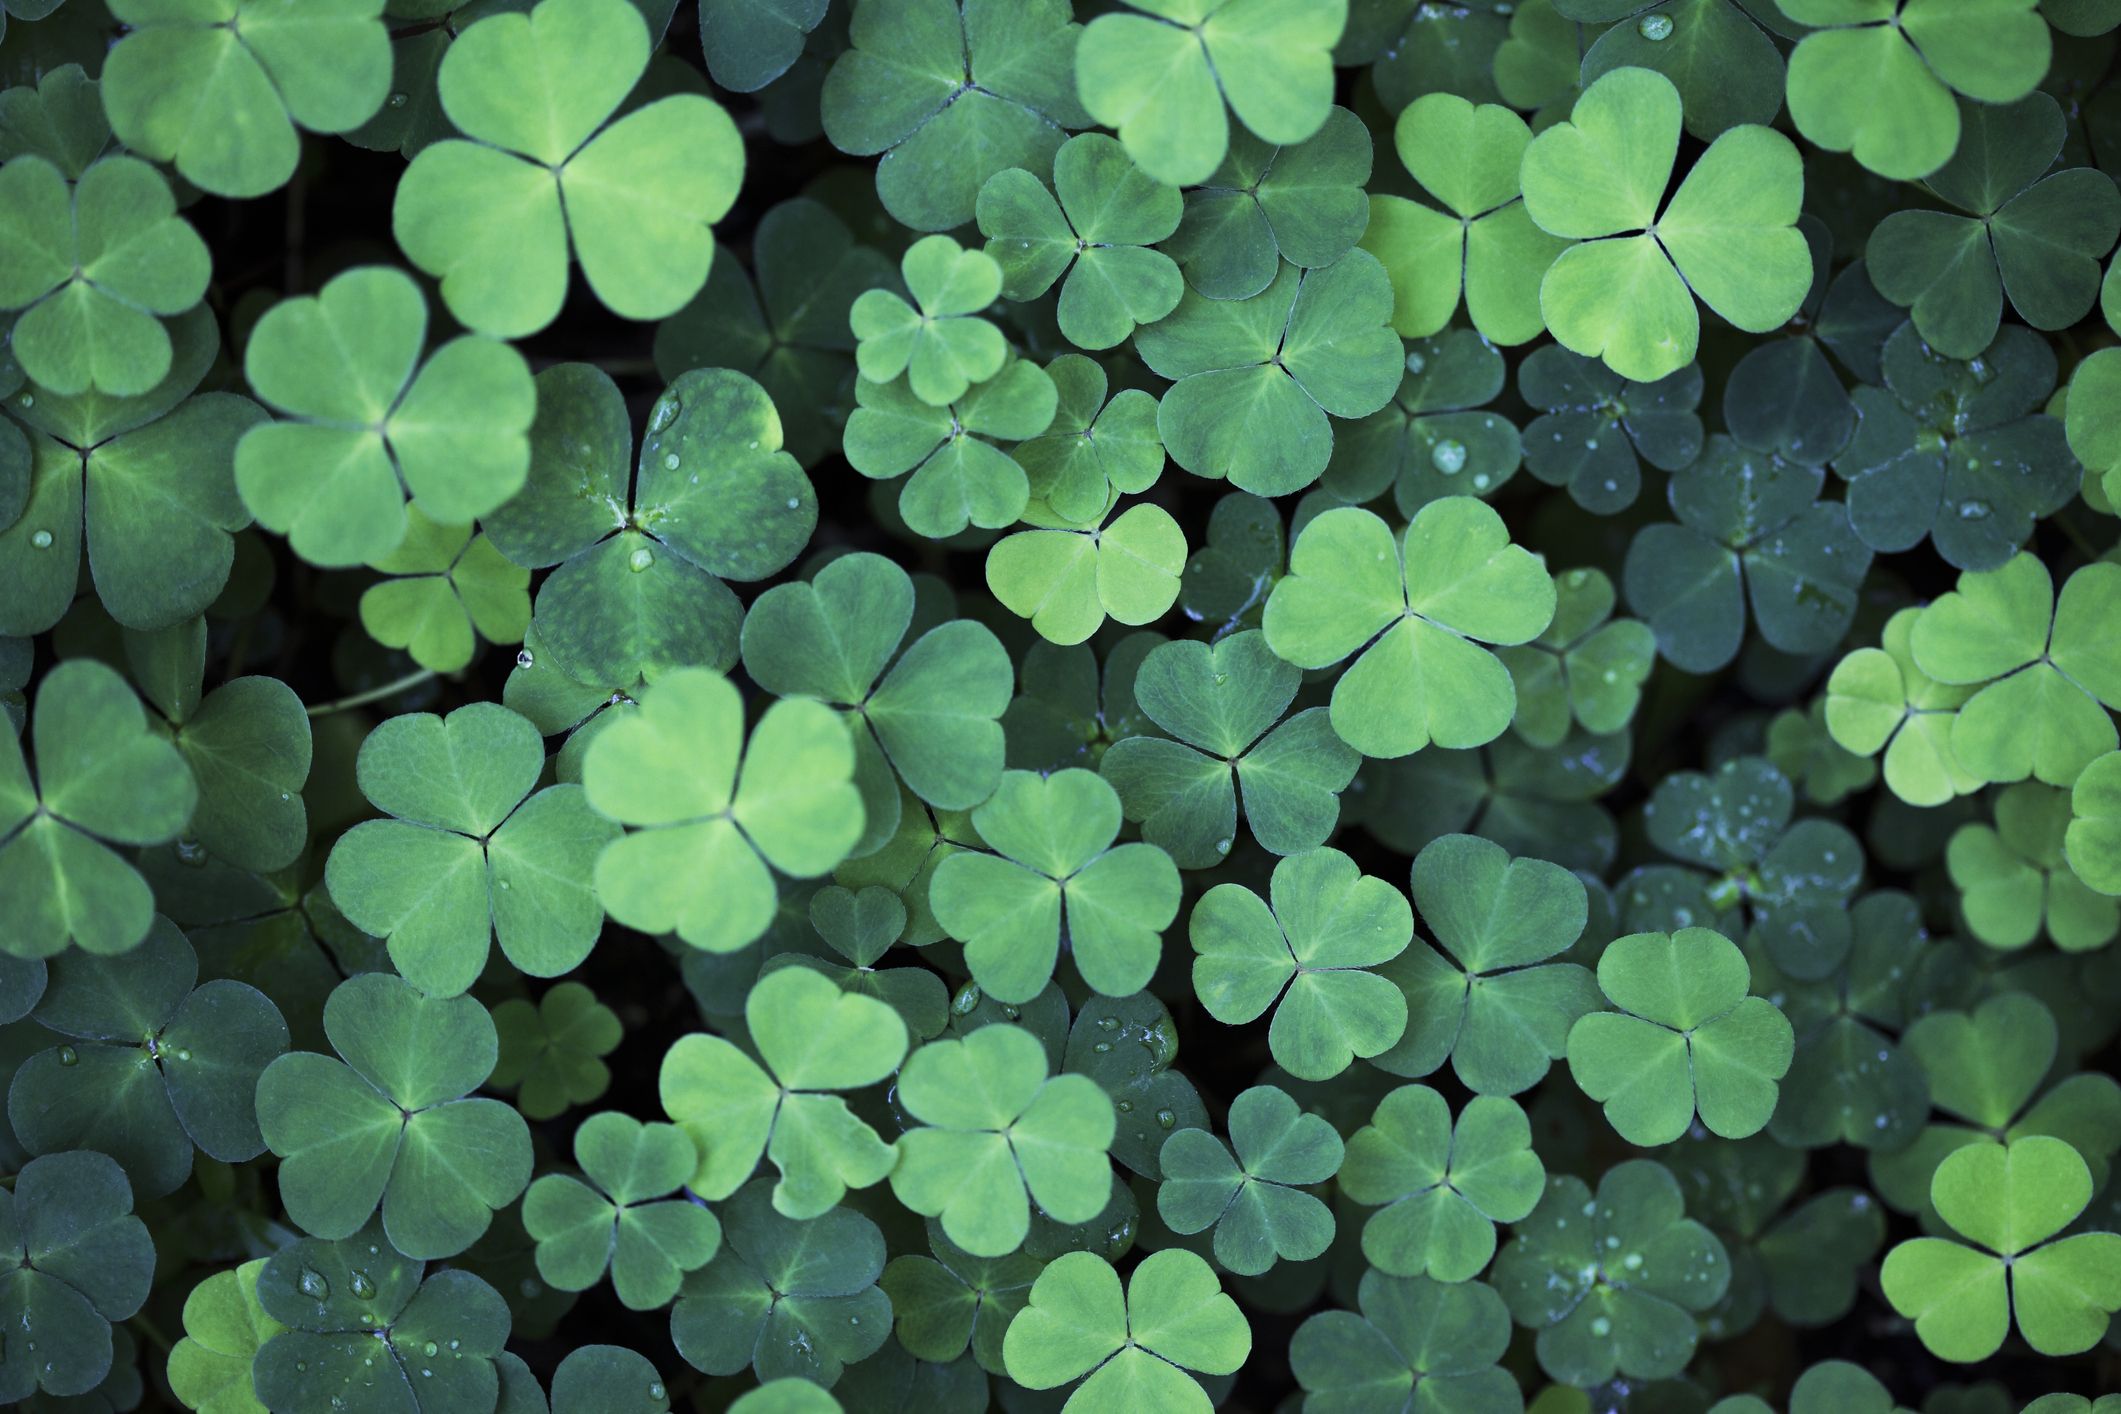 59 Best St. Patrick's Day Quotes - Irish Sayings for Good Luck